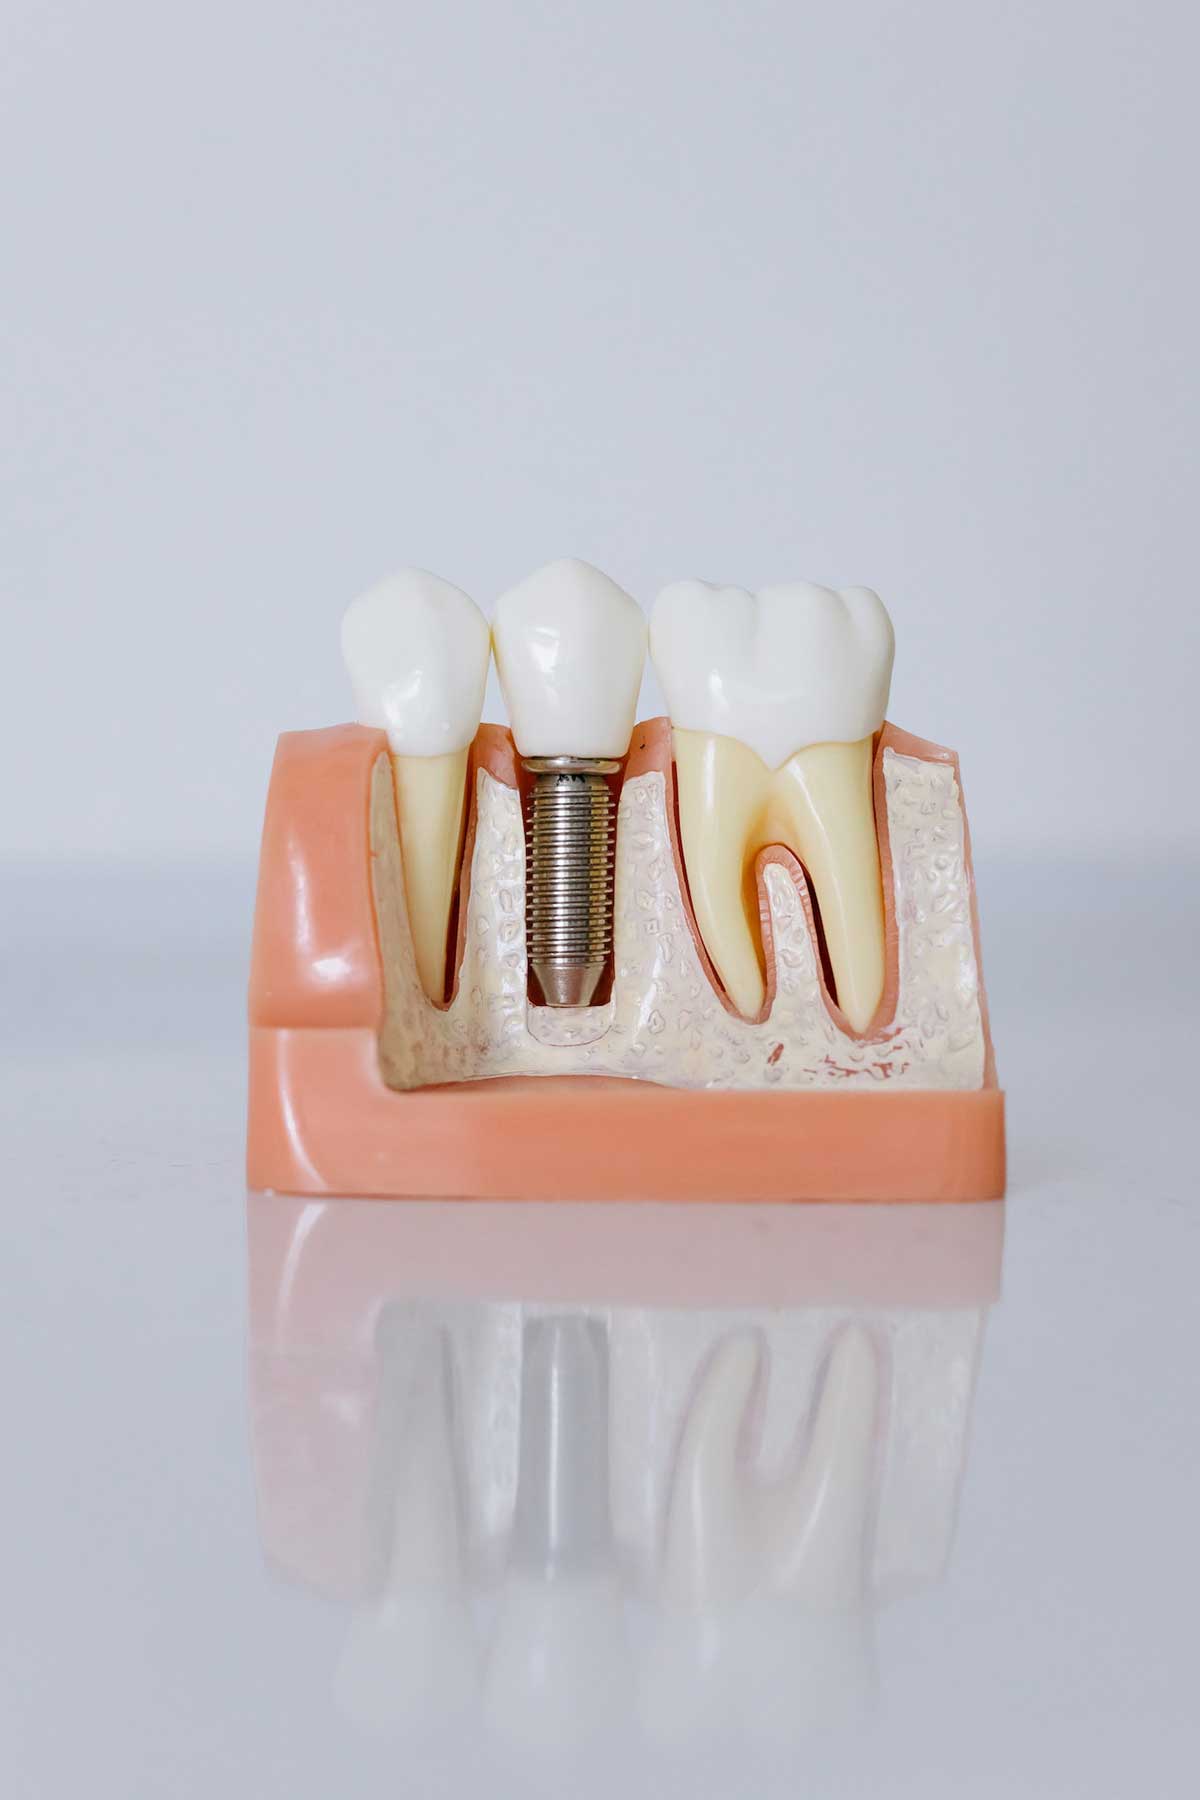 Example of dental implant